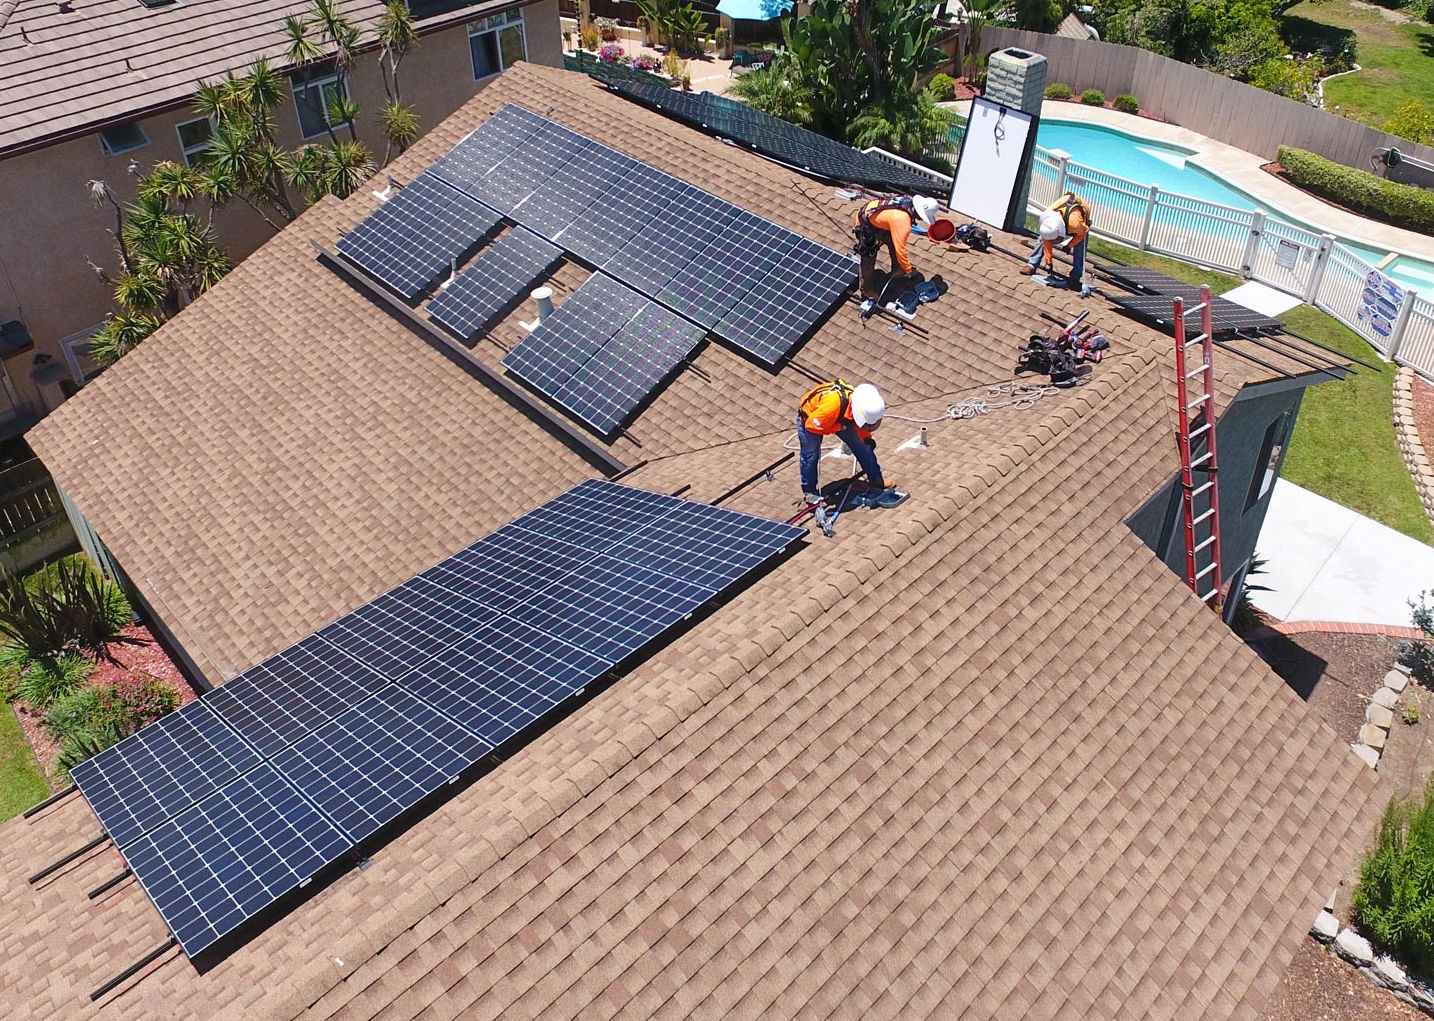 TERI first chose Baker Electric Solar in 2013 for two of its residences. With this contract, Baker will have provided the solar for all the non-profit’s 12 properties totaling 184 kW of solar power.